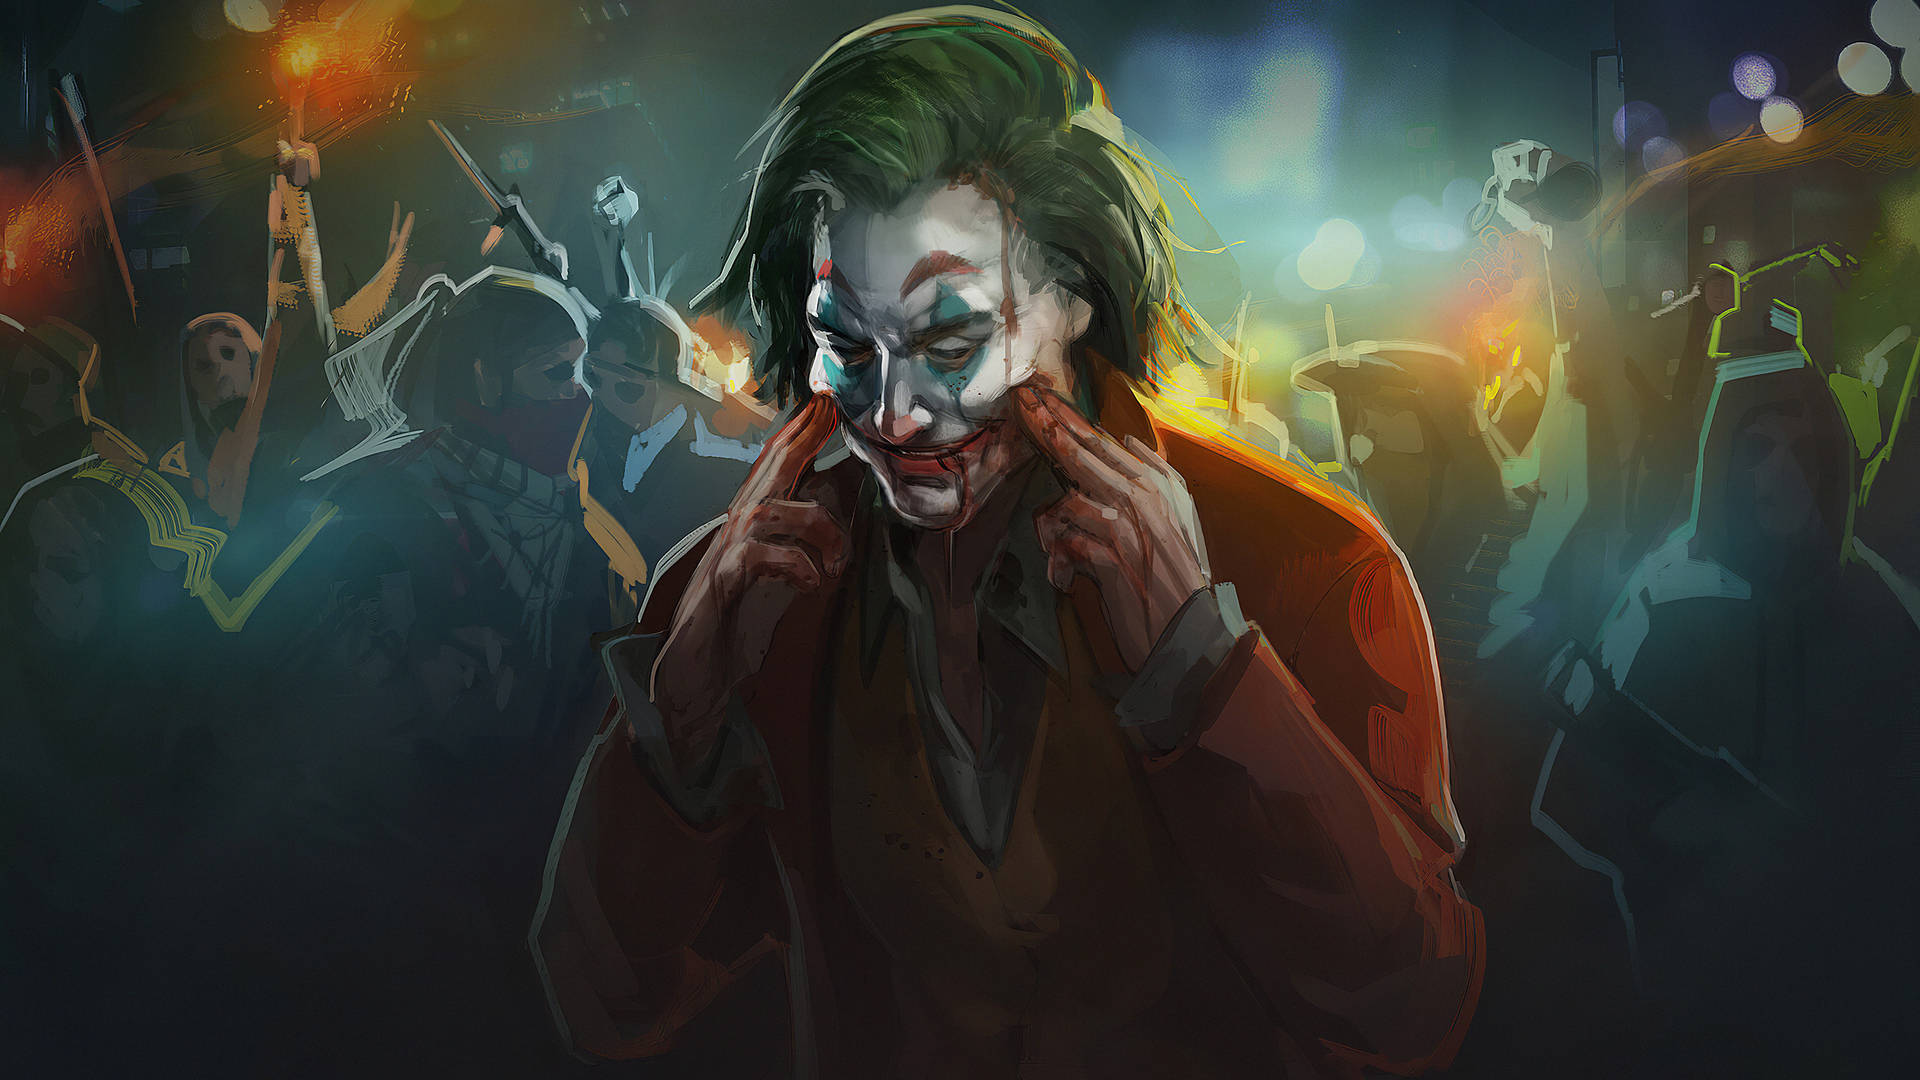 The Joker Is In Front Of A Crowd Of People